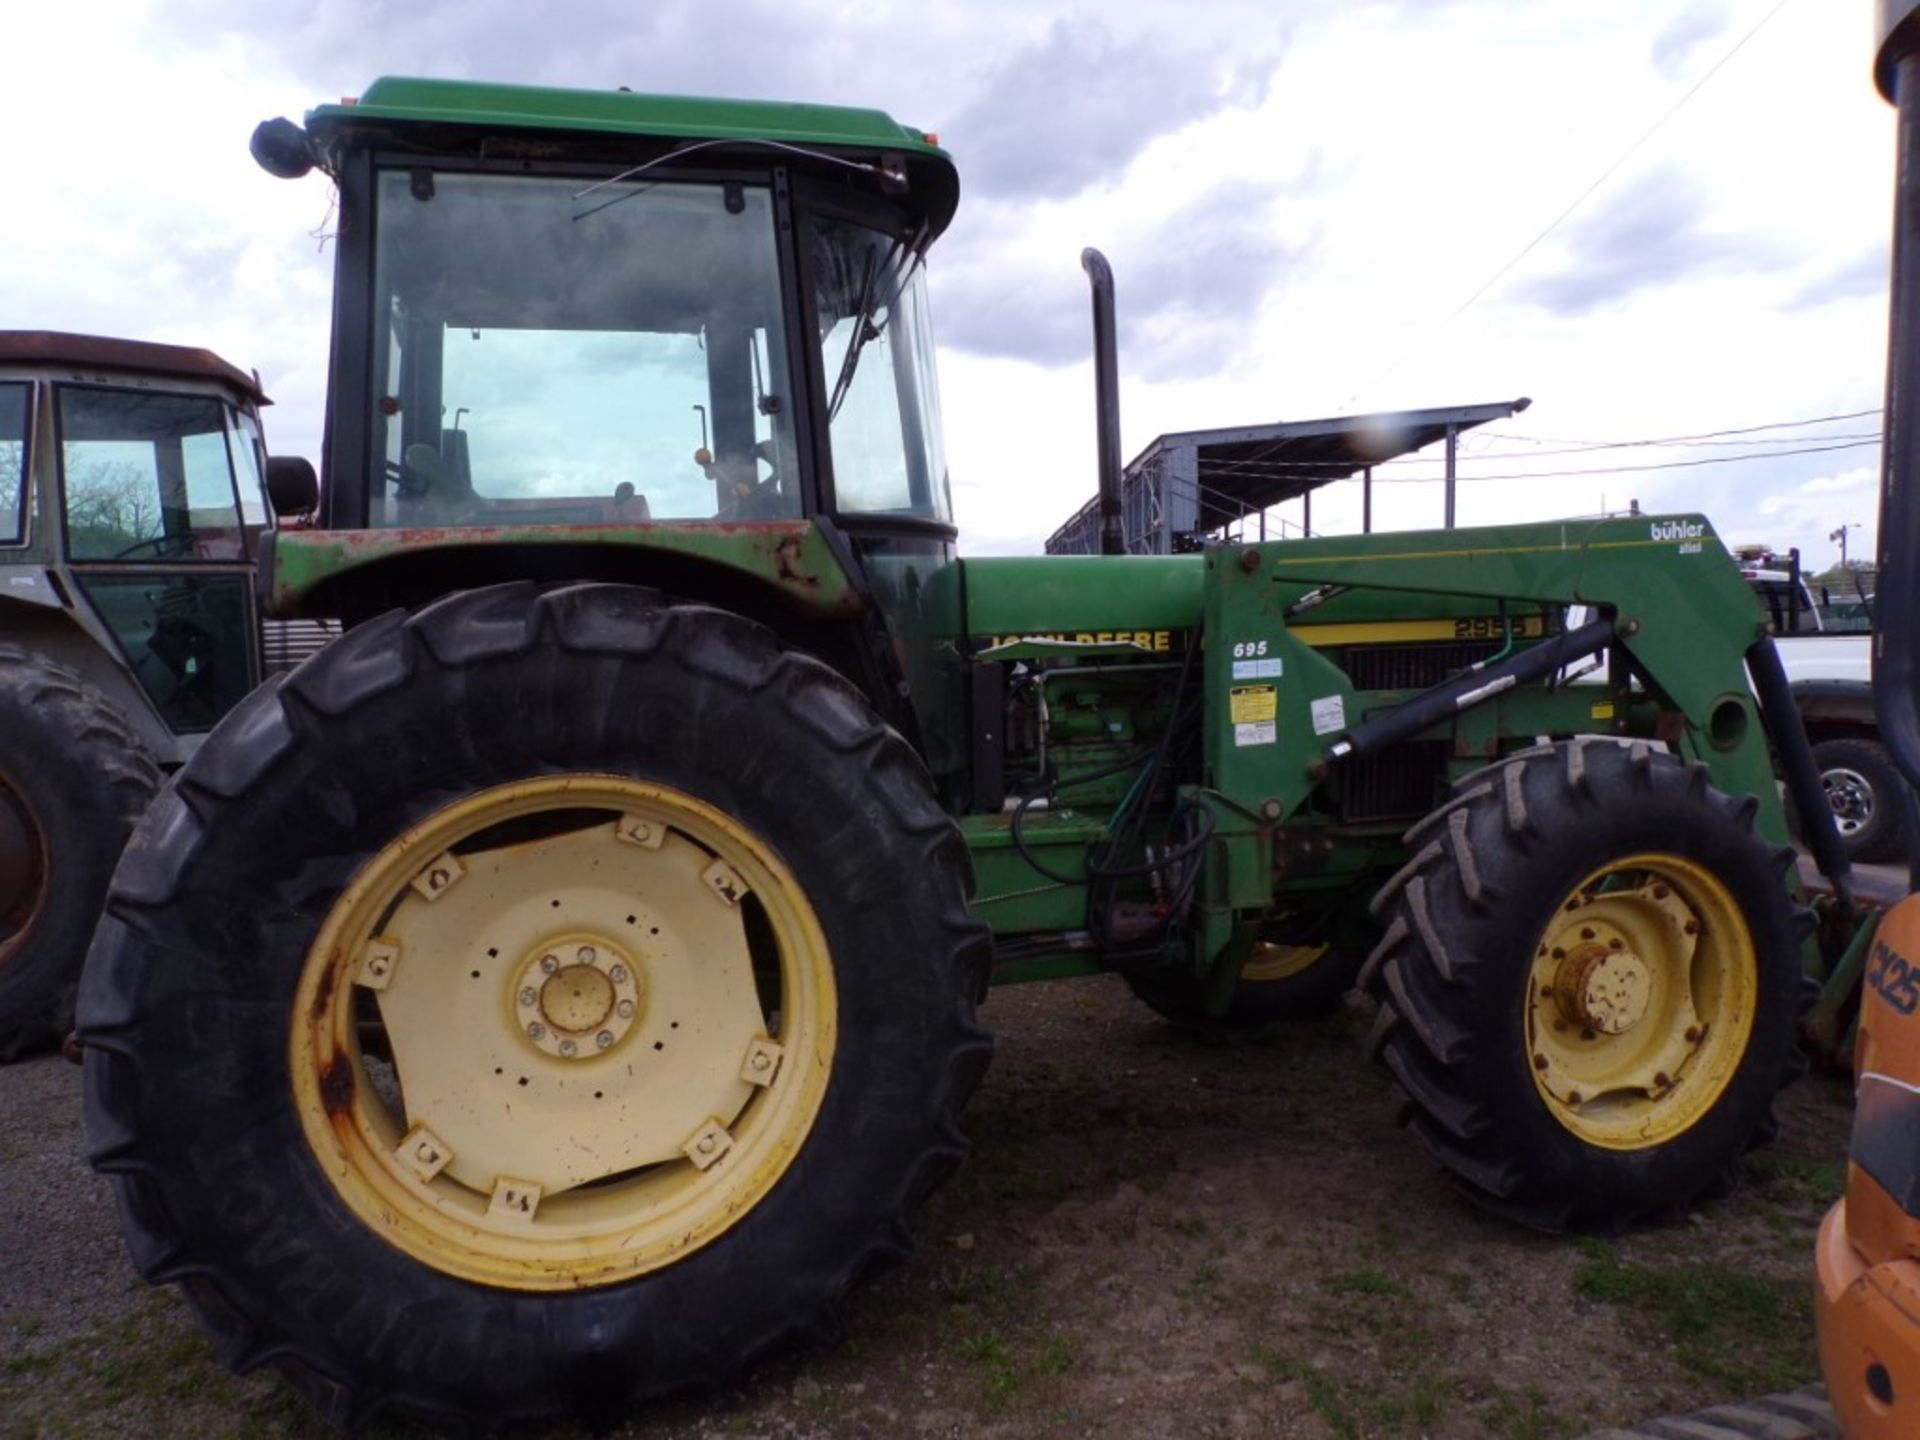 John Deere 2955 4 WD Tractor with Cab and Allied 695 Loader, Good Tires, (3) Rear Hydraulic Remotes,